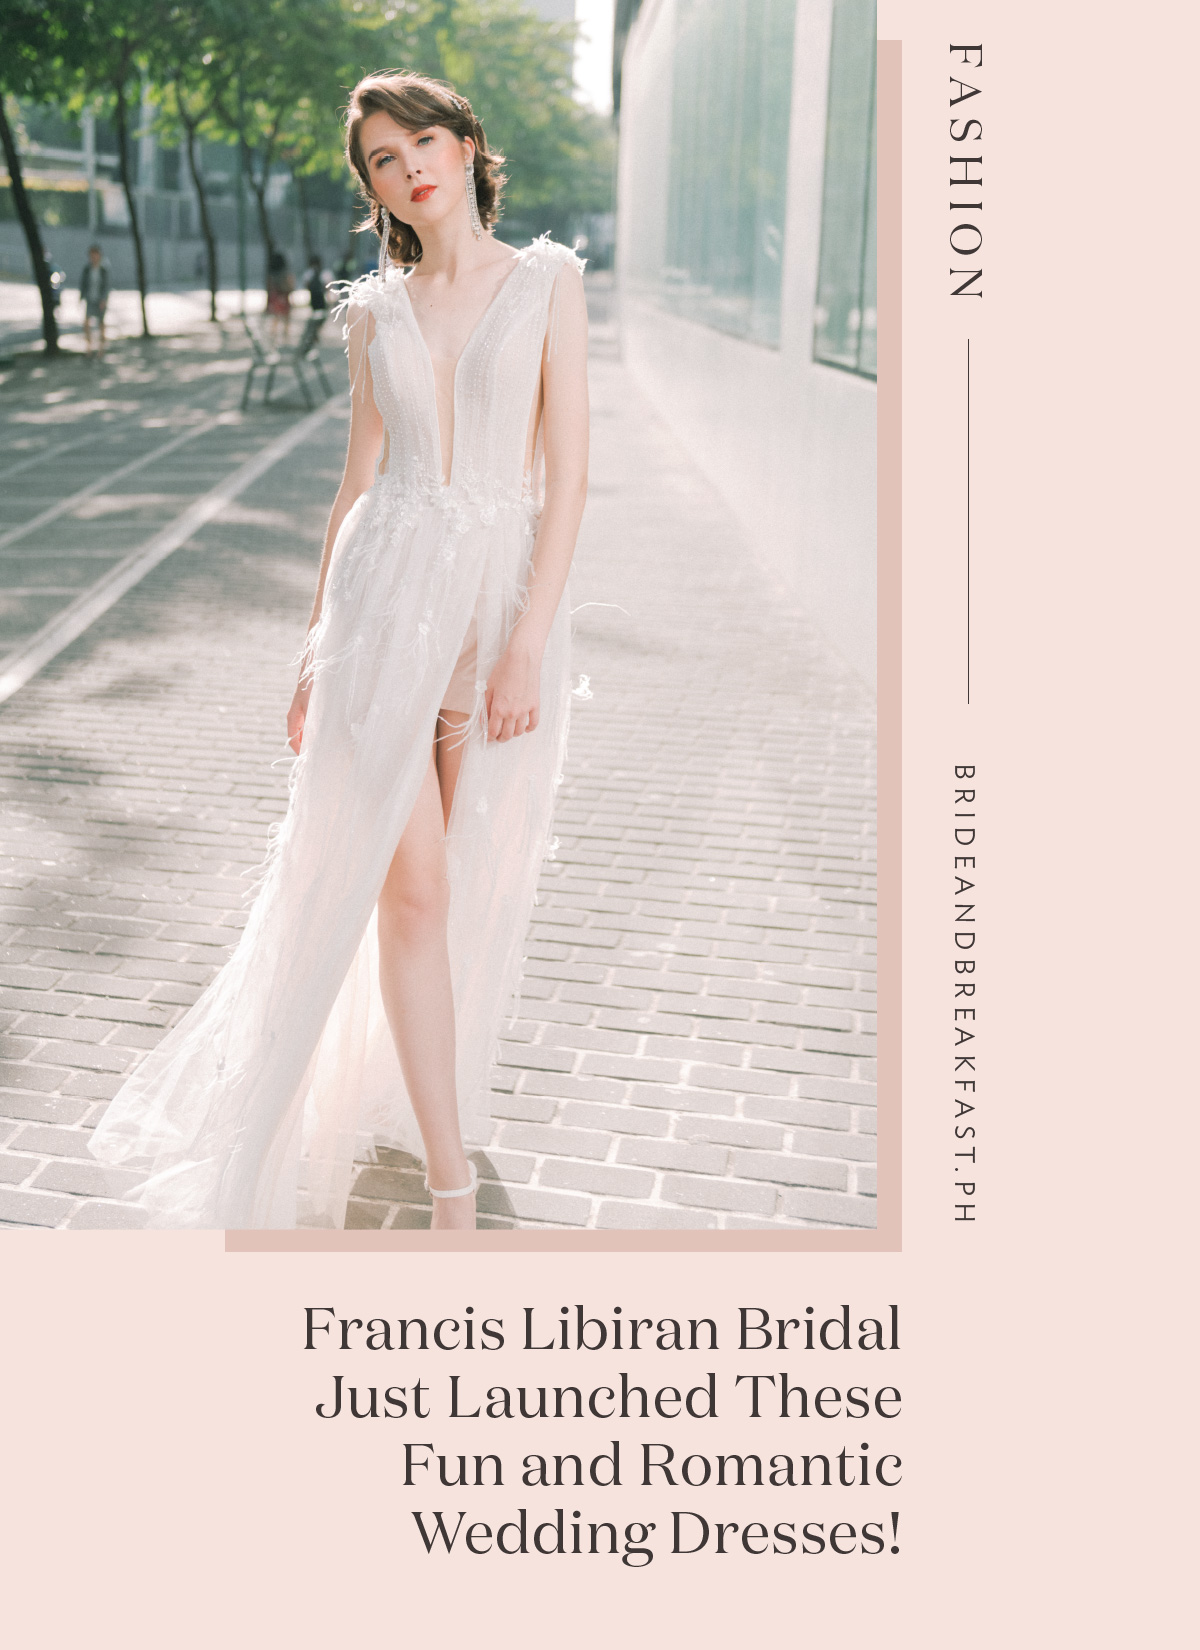 Francis Libiran Bridal Just Launched These Fun and Romantic Wedding Dresses!